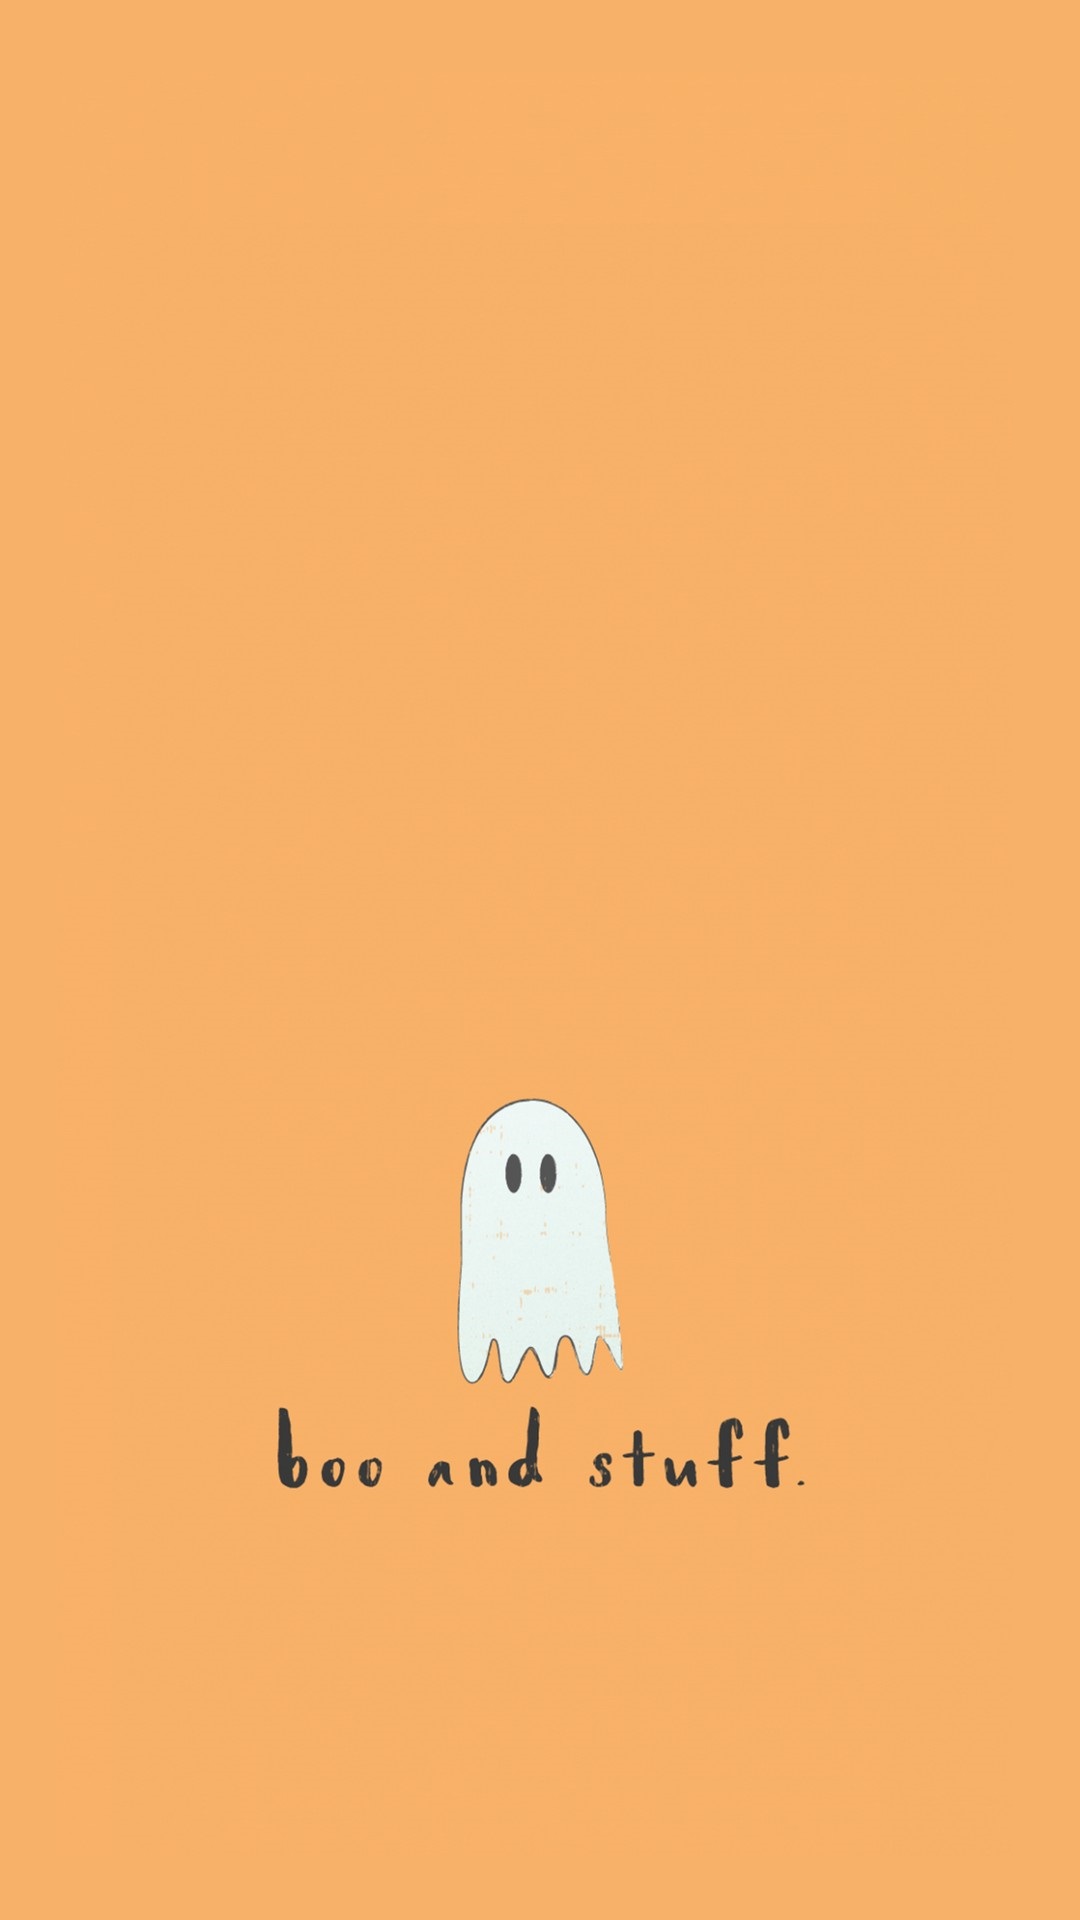 Cute Halloween Wallpaper for iPhone With high-resolution 1080X1920 pixel. You can use this wallpaper for your iPhone 5, 6, 7, 8, X, XS, XR backgrounds, Mobile Screensaver, or iPad Lock Screen